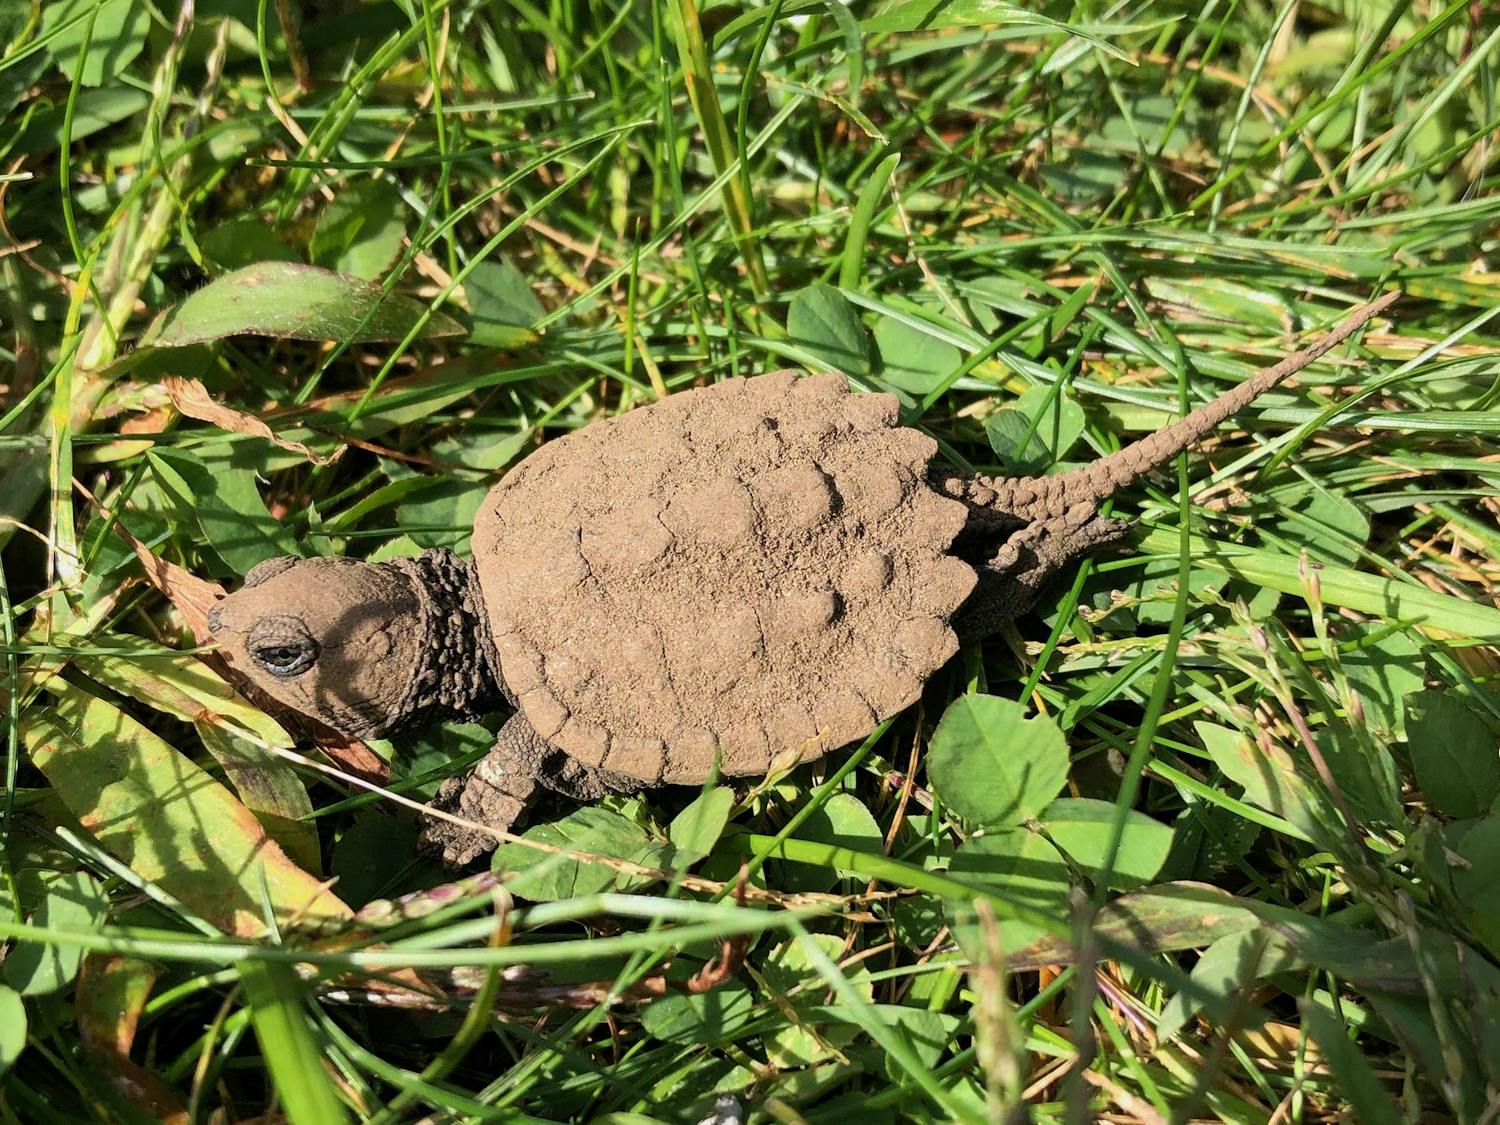 Baby_snapping_turtle_(Chelydra_serpentina)_in_grass.jpg